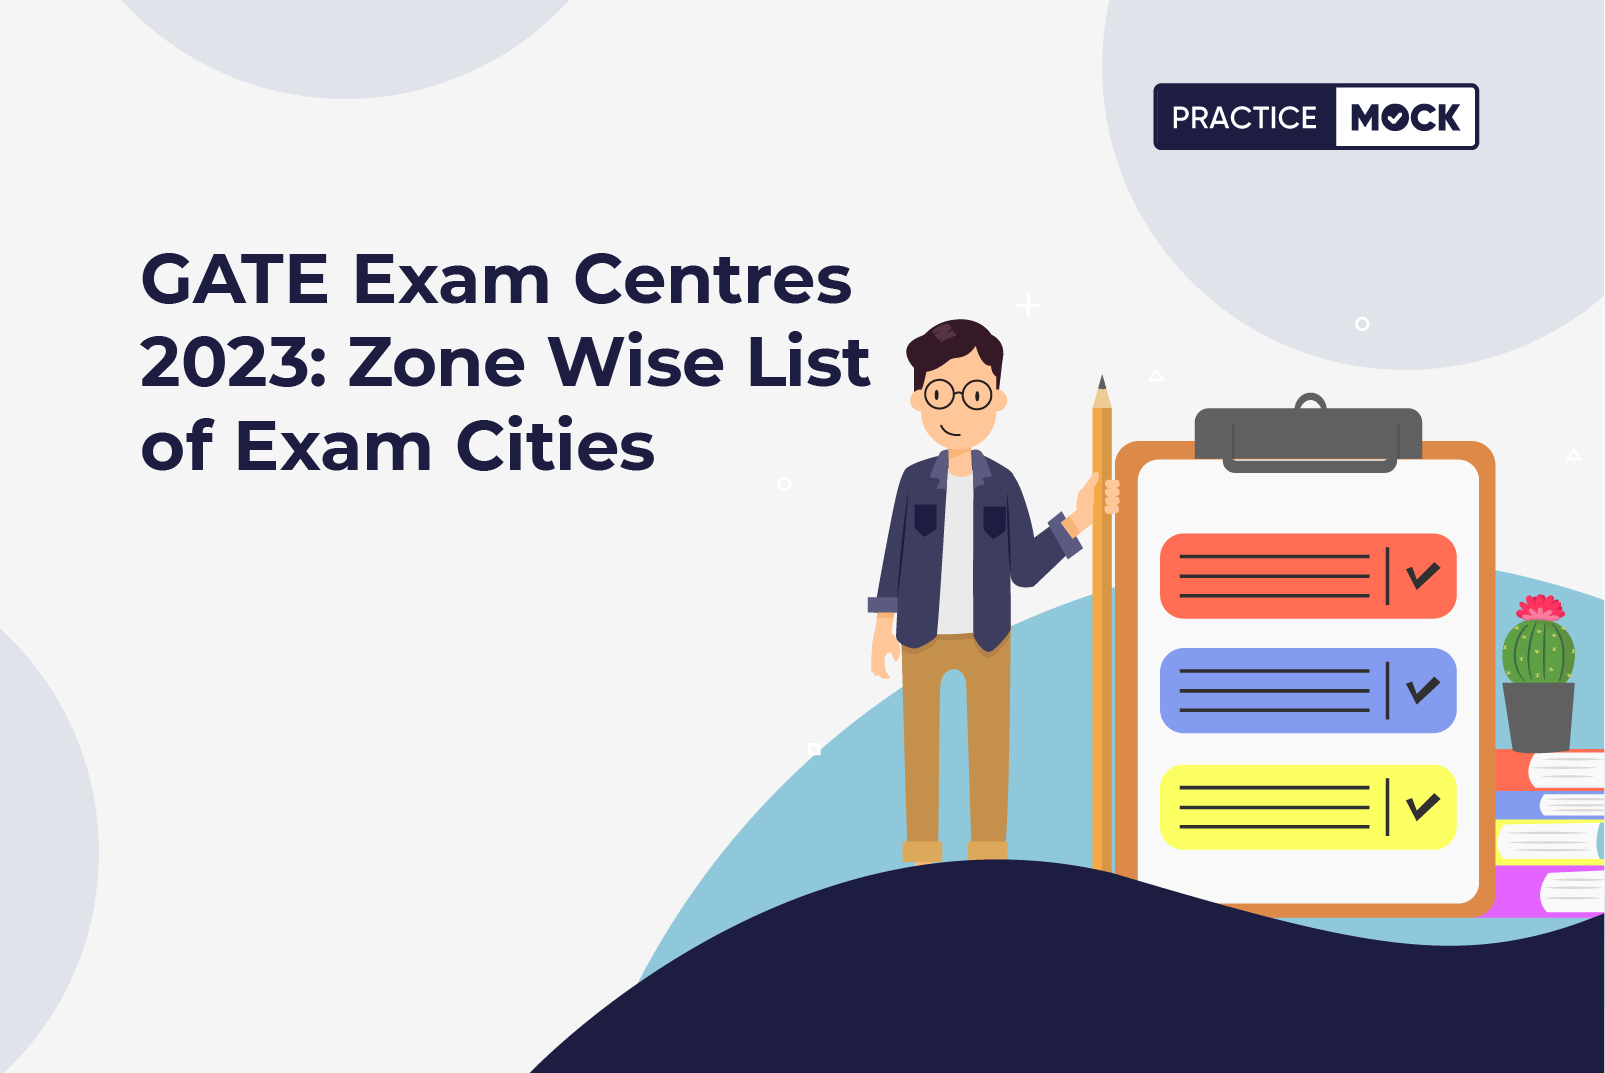 GATE Exam Centres 2023 Zone-wise list of Exam Cities